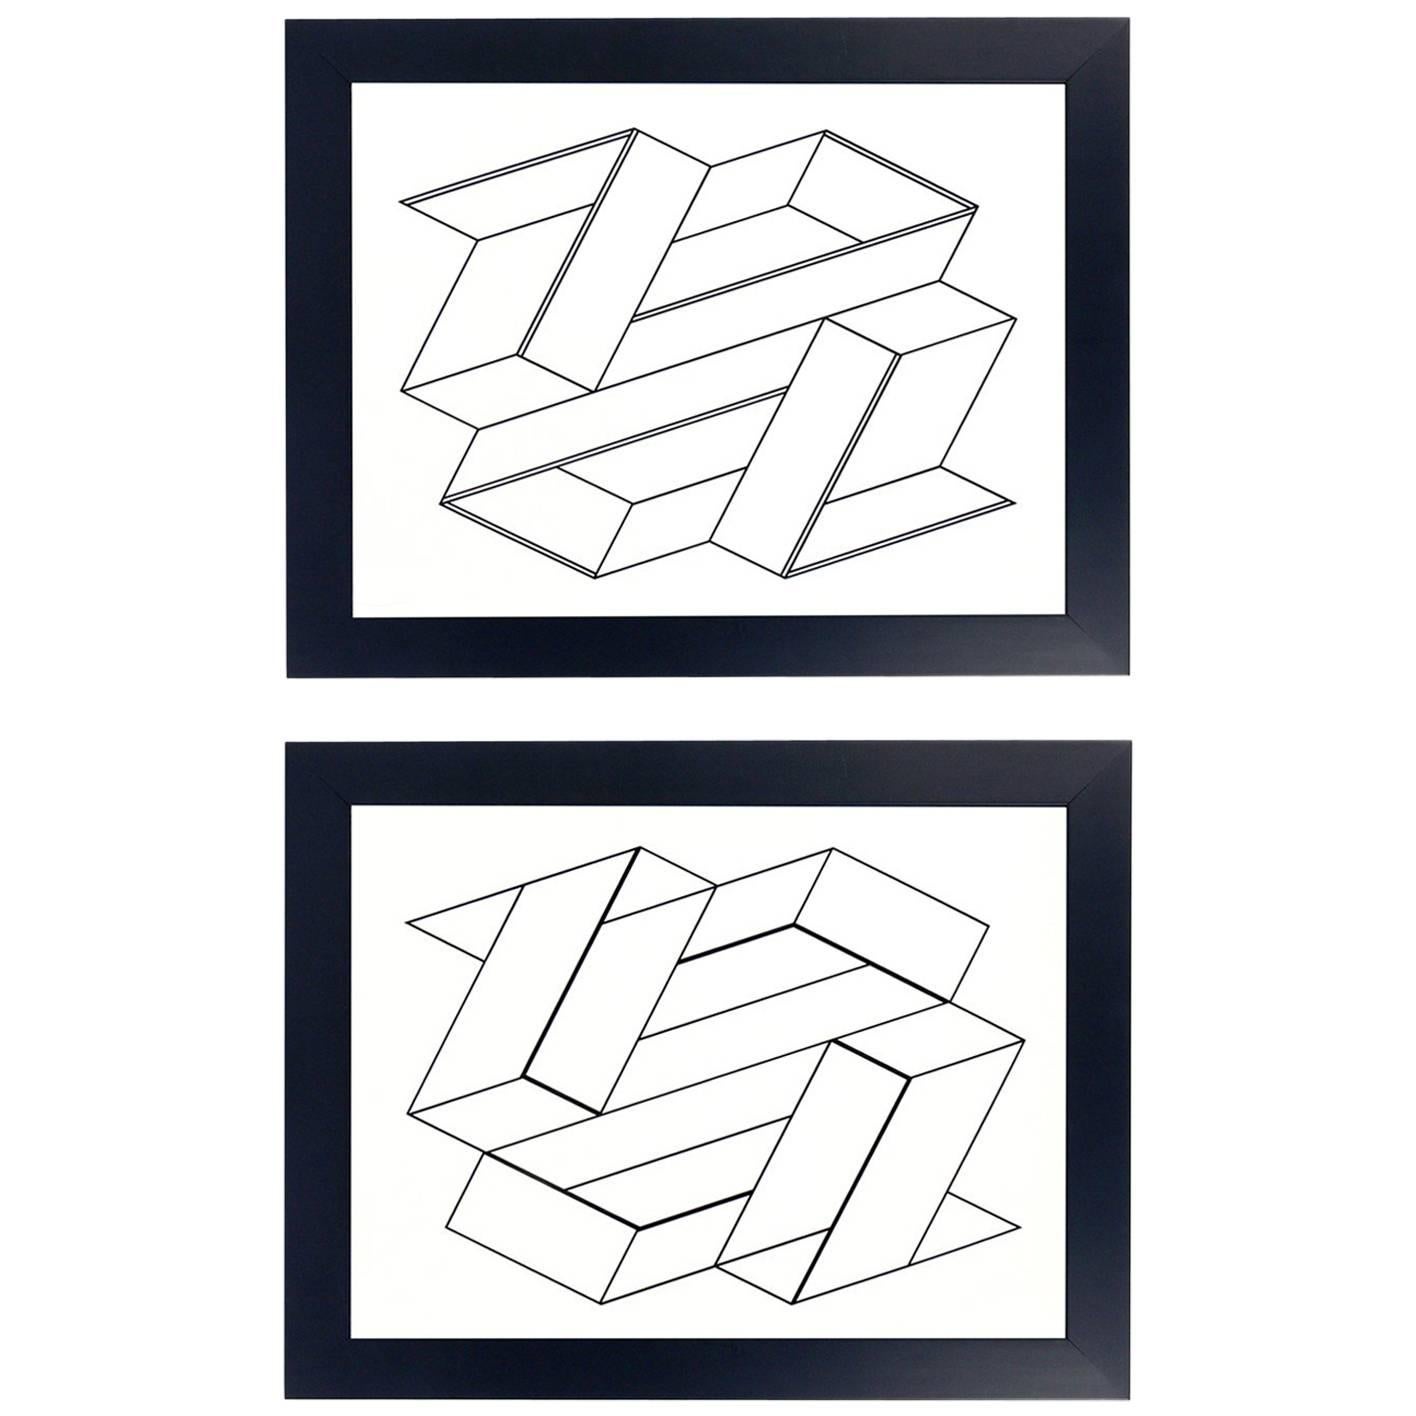 Black and White Lithographs by Josef Albers from Formulation and Articulation